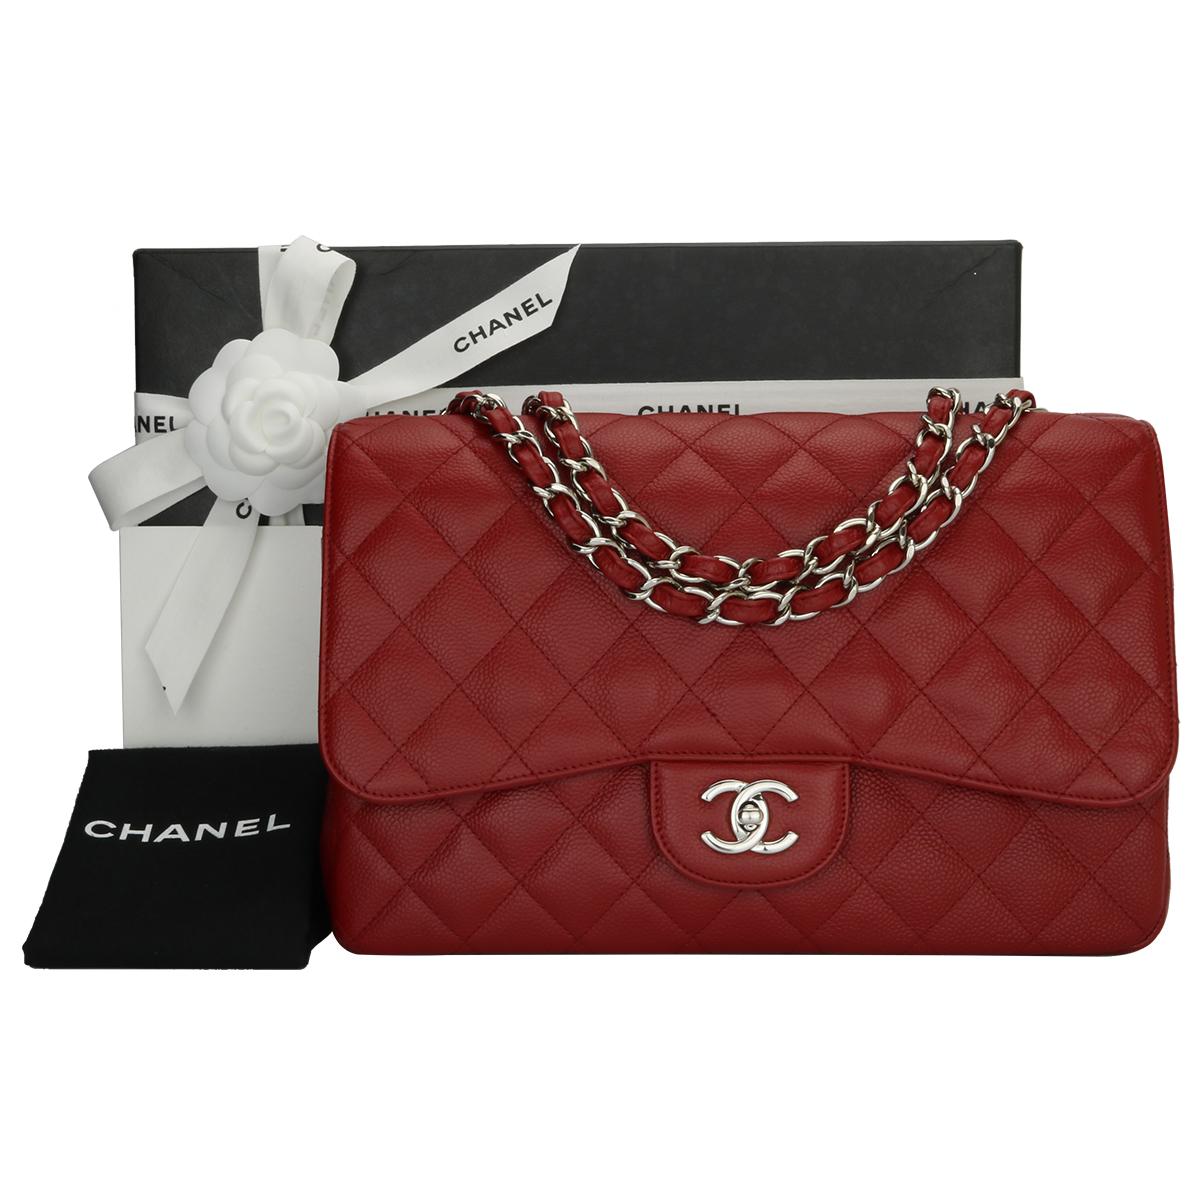 Authentic CHANEL Classic Single Flap Jumbo Bag Red Caviar with Silver Hardware 2009.

This stunning bag is in excellent condition, the bag still holds its original shape and the hardware is still very shiny.

Exterior Condition: Excellent condition,